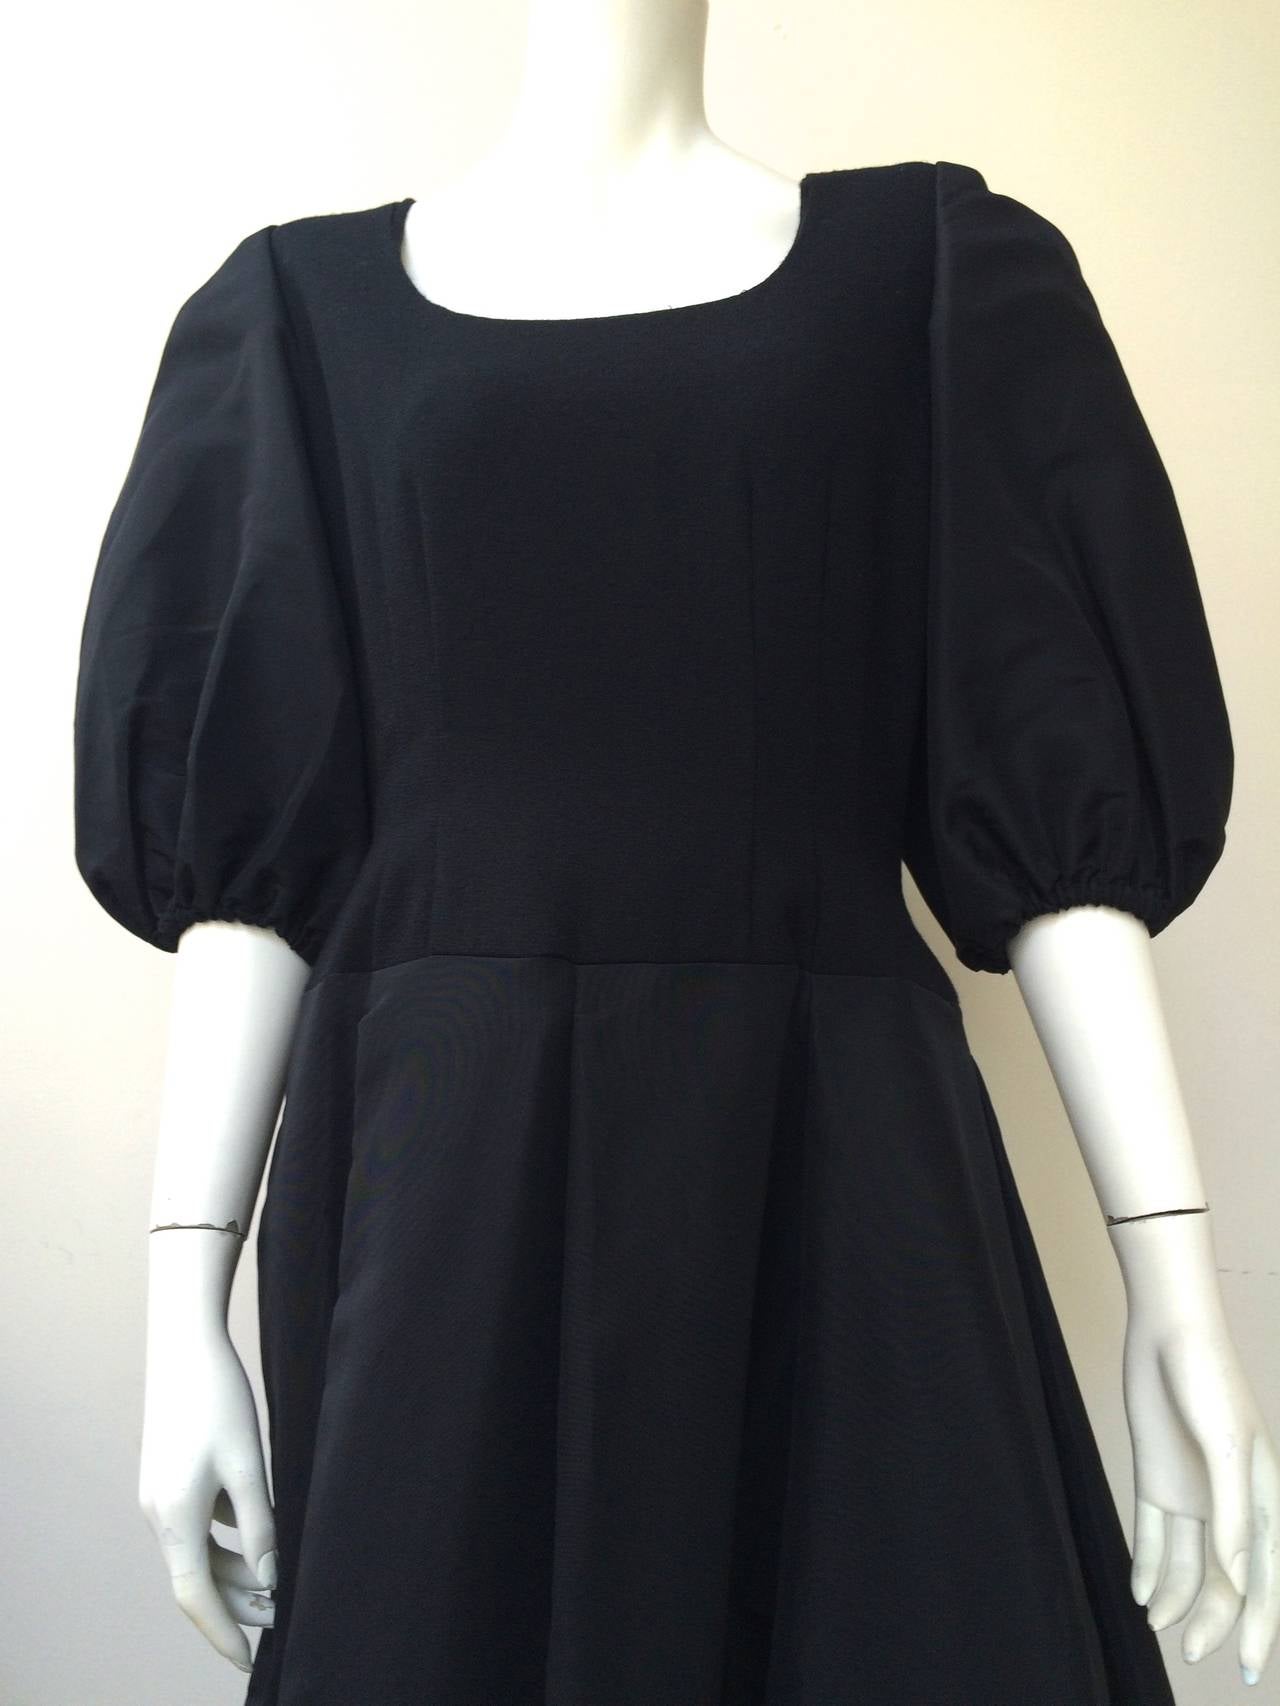 Pauline Trigere 1980s black wool & silk taffeta cocktail dress made in the USA. Bodice is wool, sleeves are silk taffeta.  Skirt is silk taffeta and trimmed in wool. Elastic sleeves. This is a fine example of Pauline Trigere's work, her clothes are